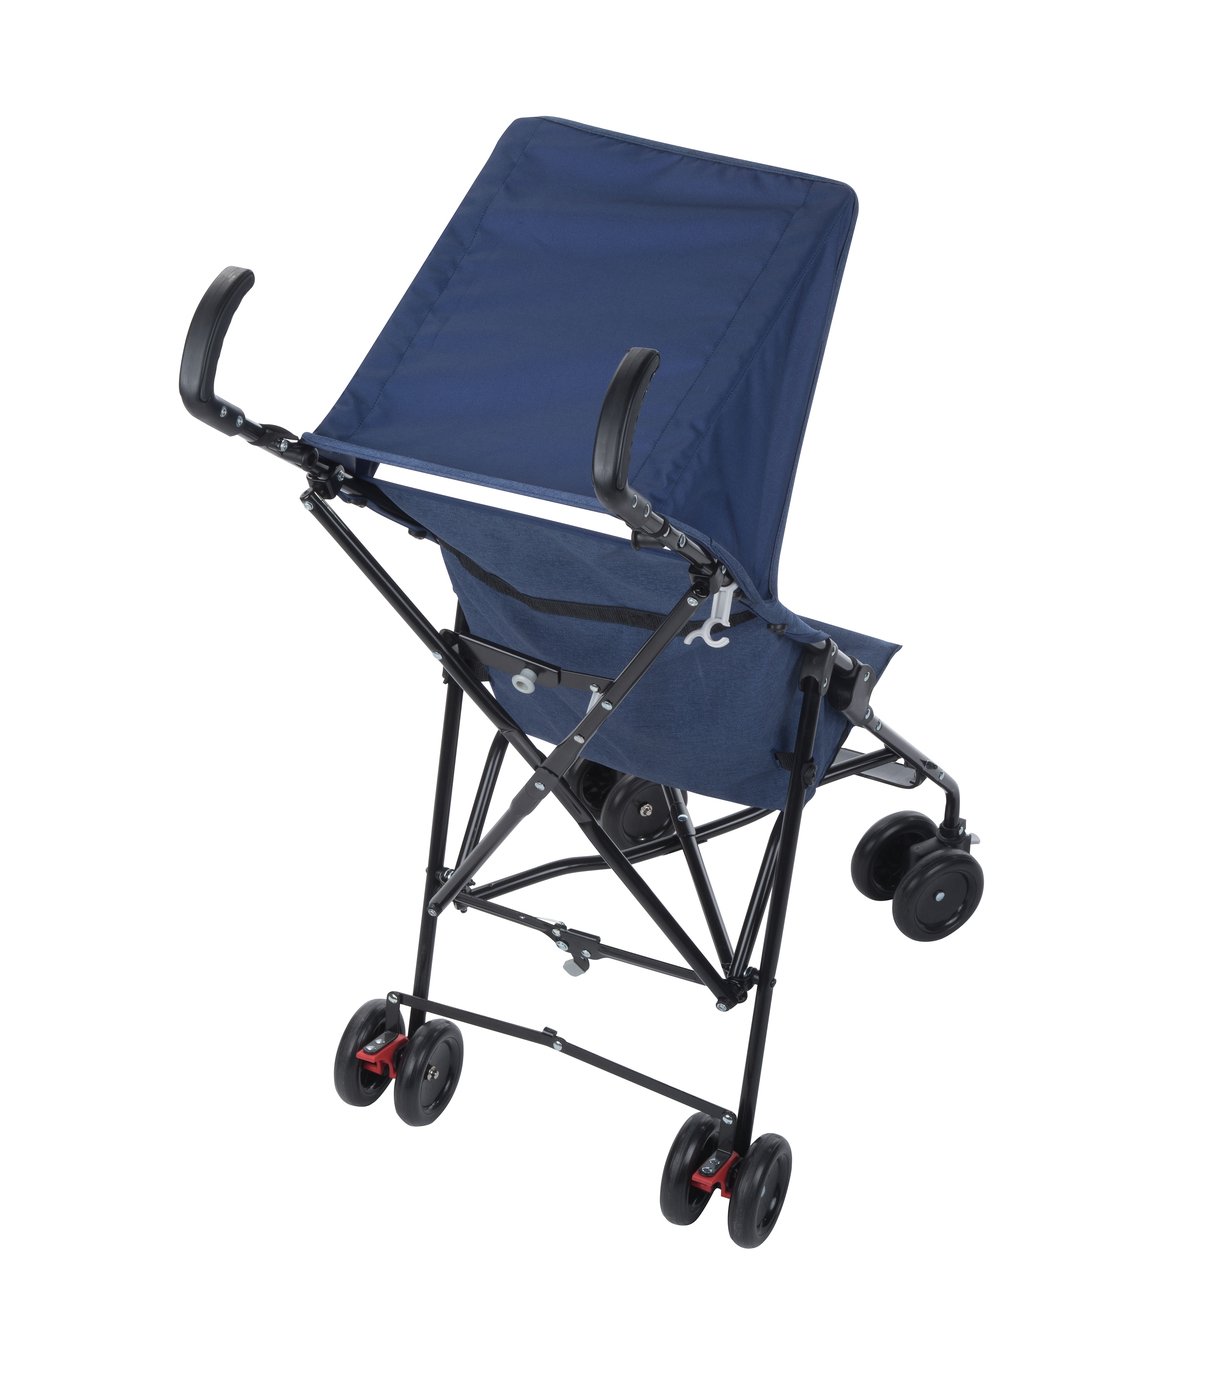 Safety 1st Pushchair Including Canopy Review